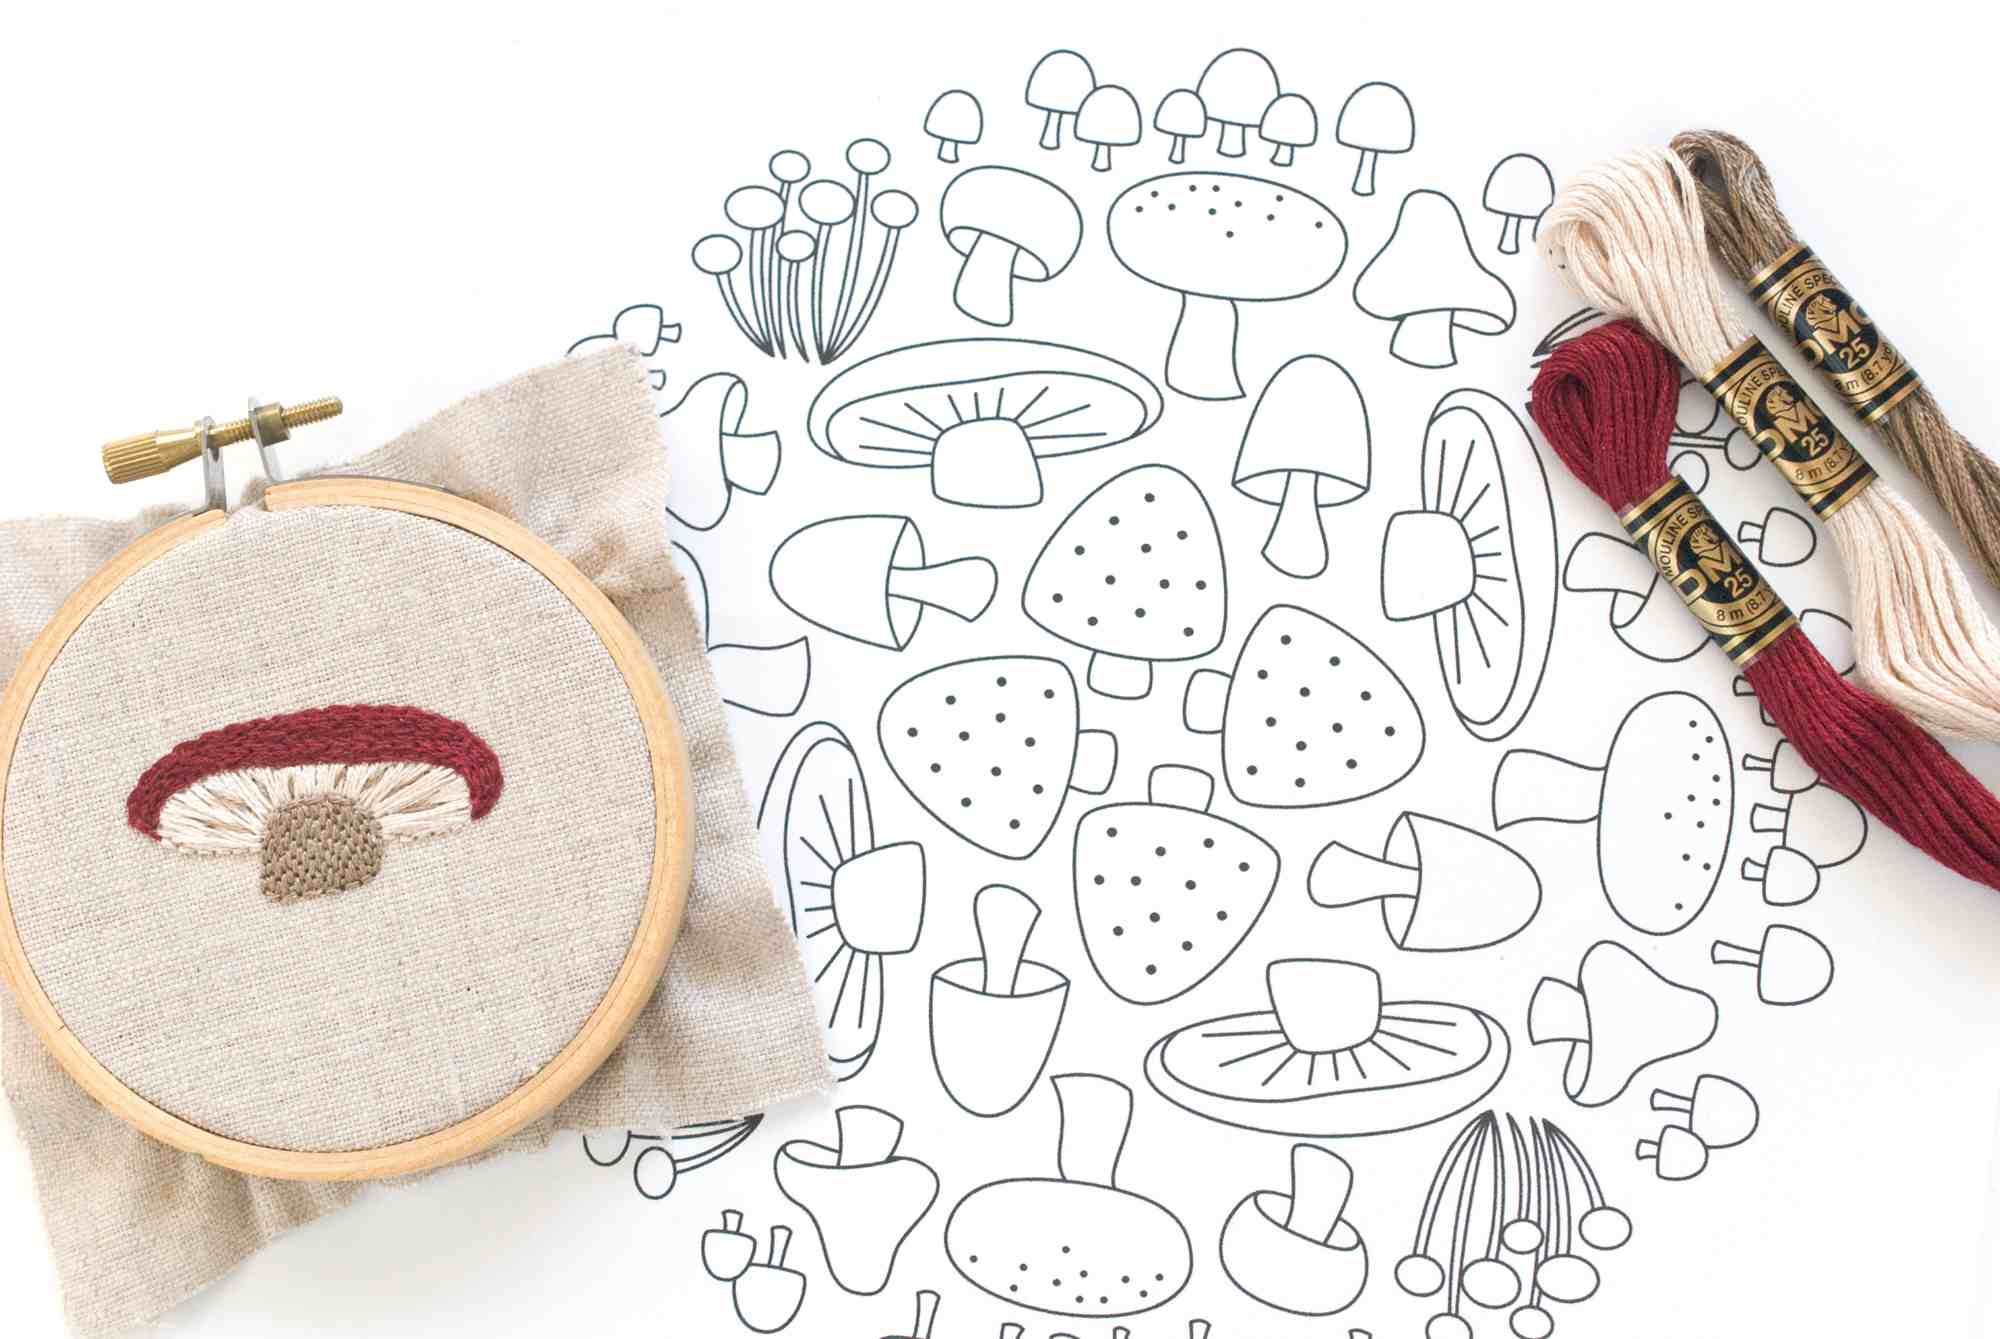 Free Crewel Embroidery Patterns Mushroom Mosaic Free Embroidery Pattern